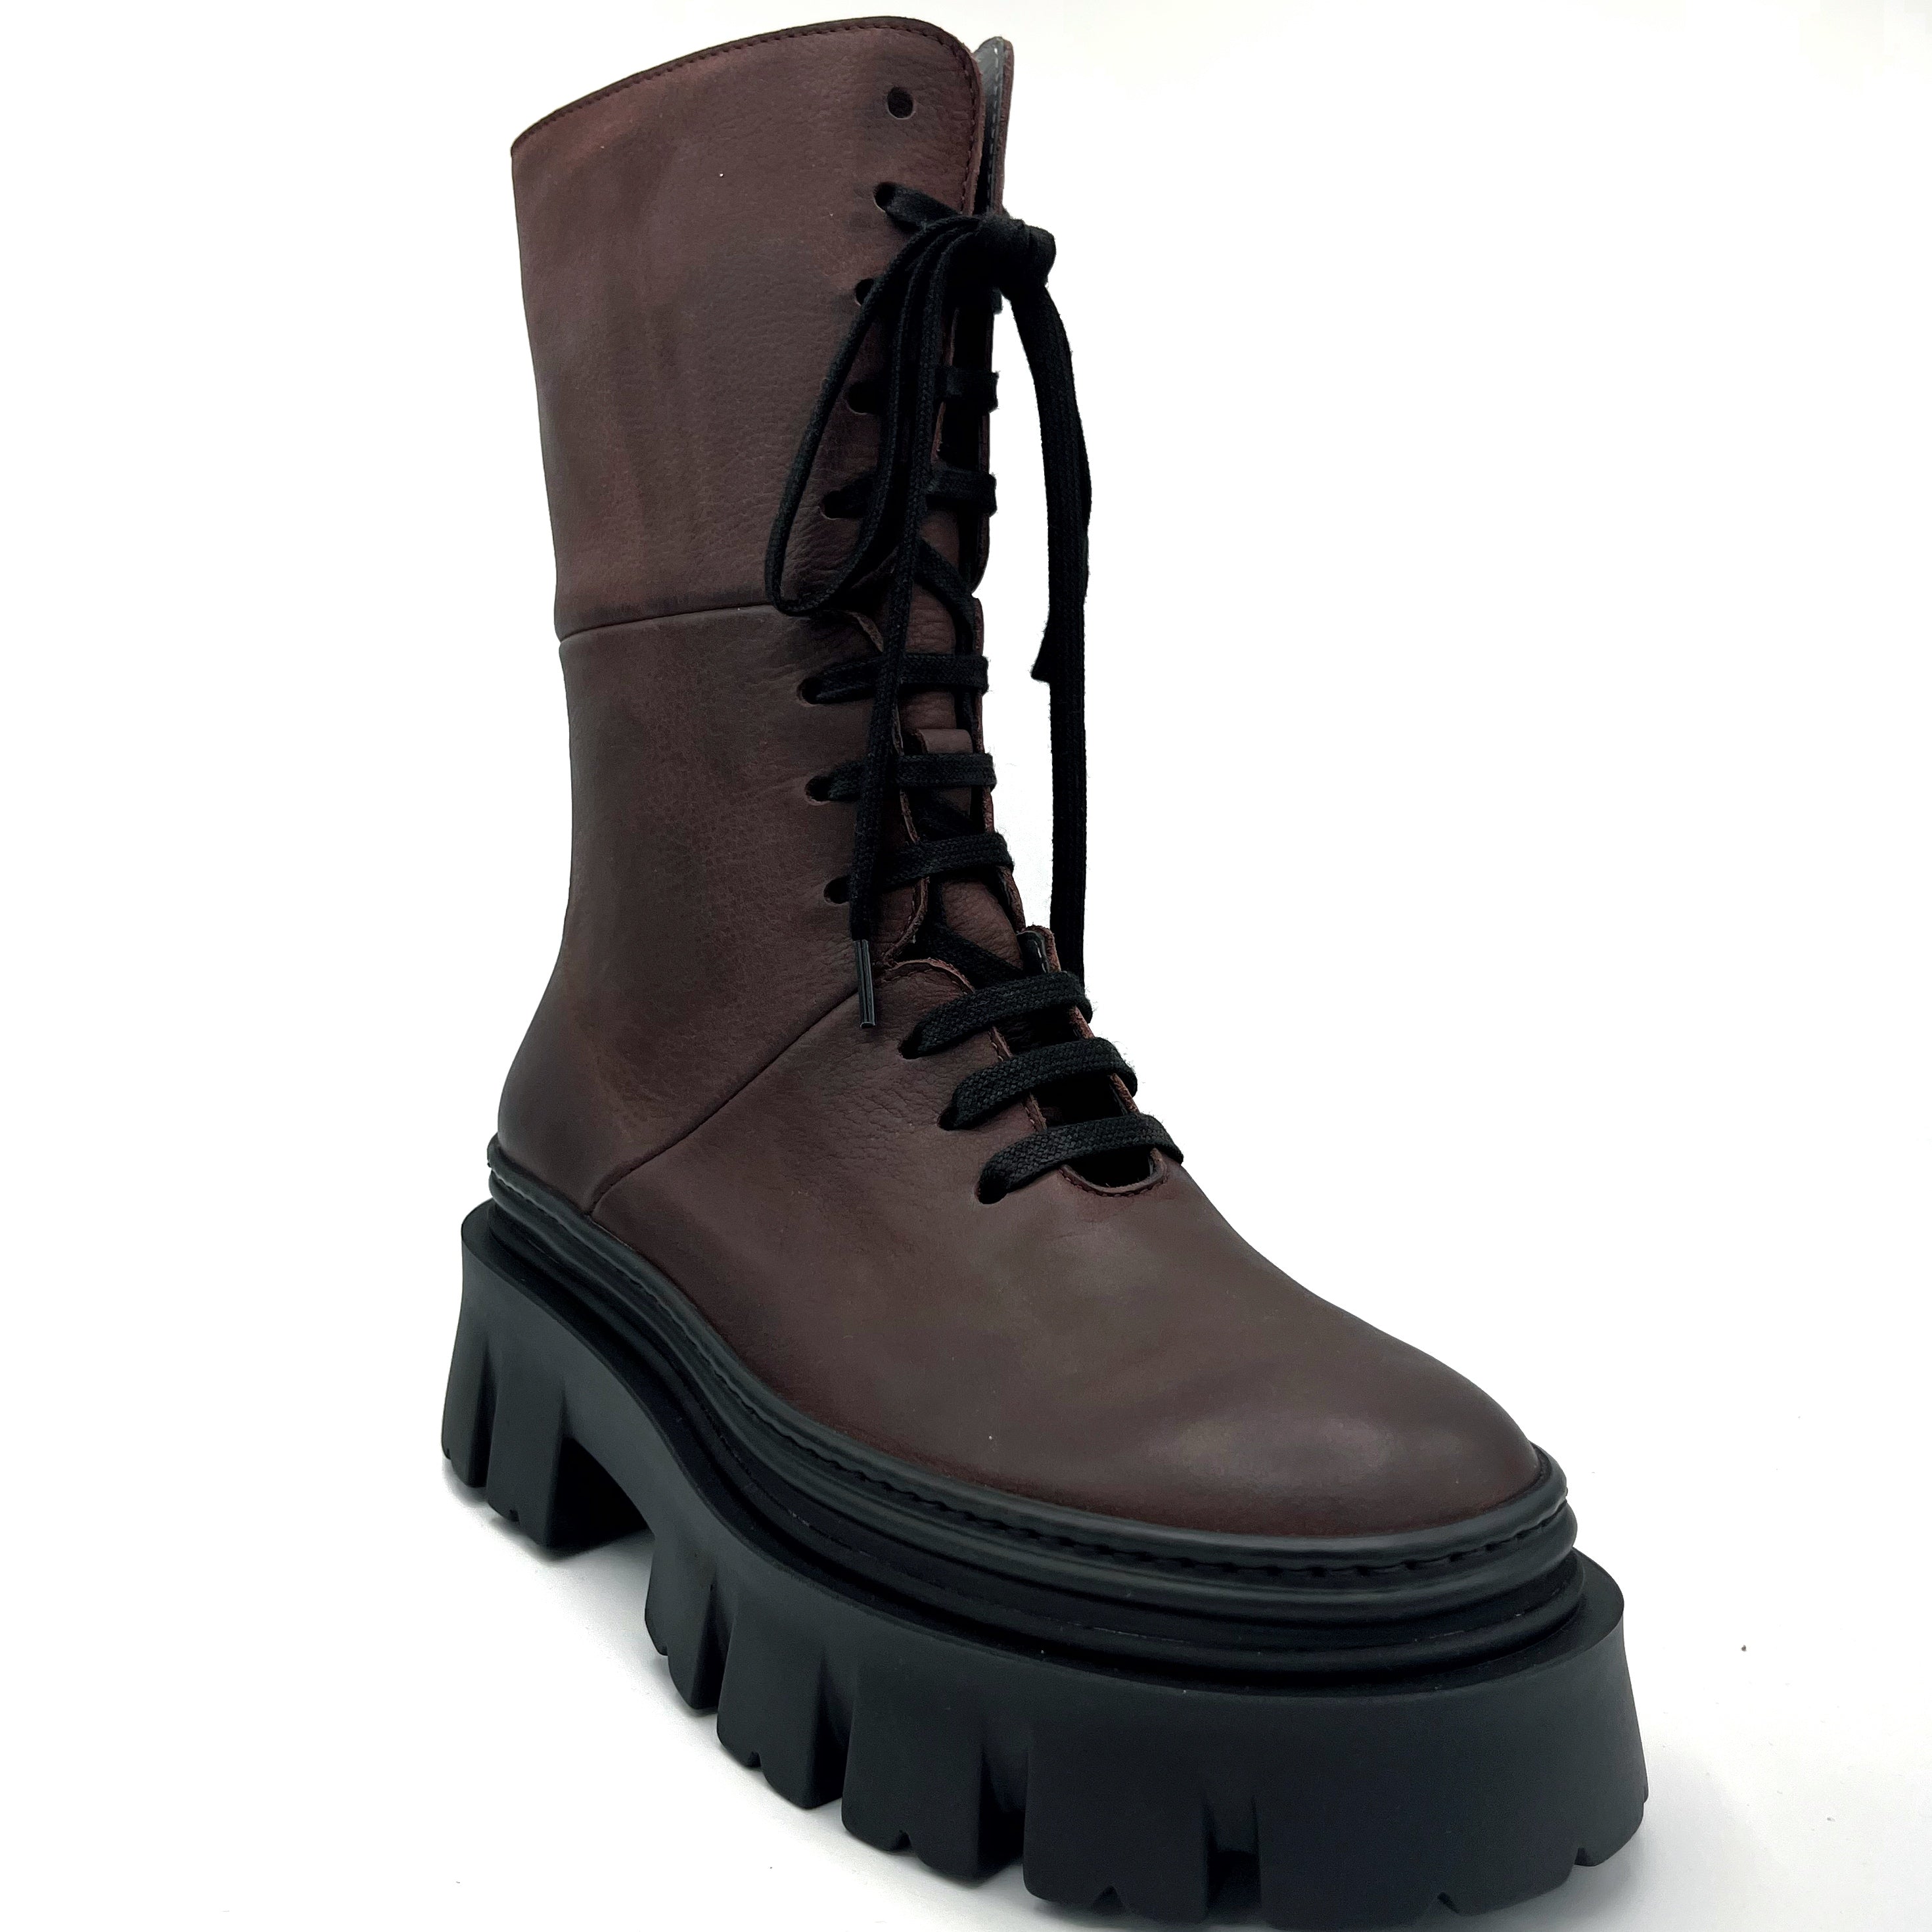 Outer front side view of the Lofina 4344 Bordeaux/Brown Boot.